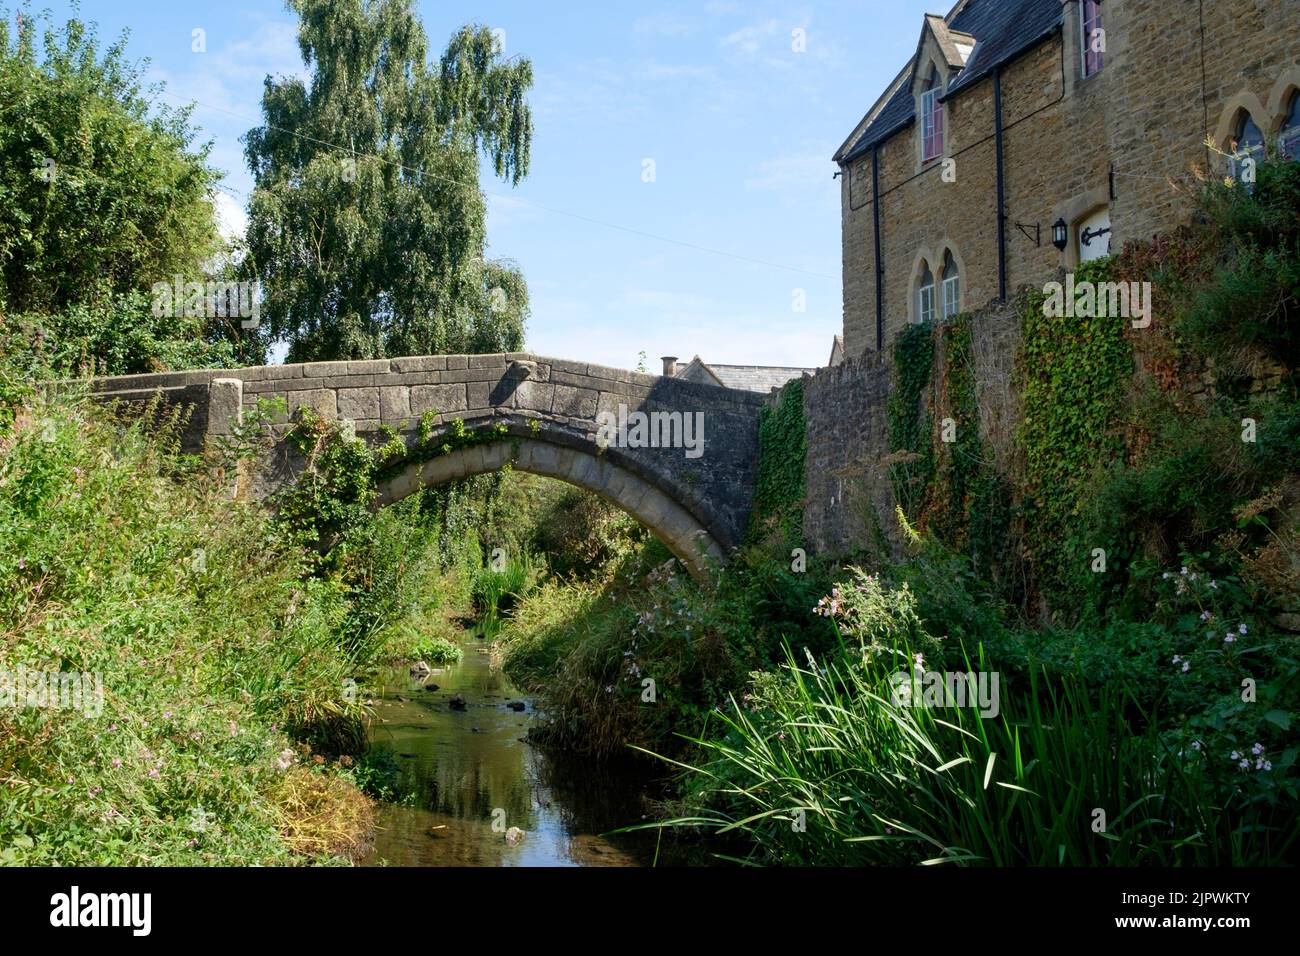 Around Bruton, a popular small town in Somerset, UK. Bridge over the River Brue Stock Photo